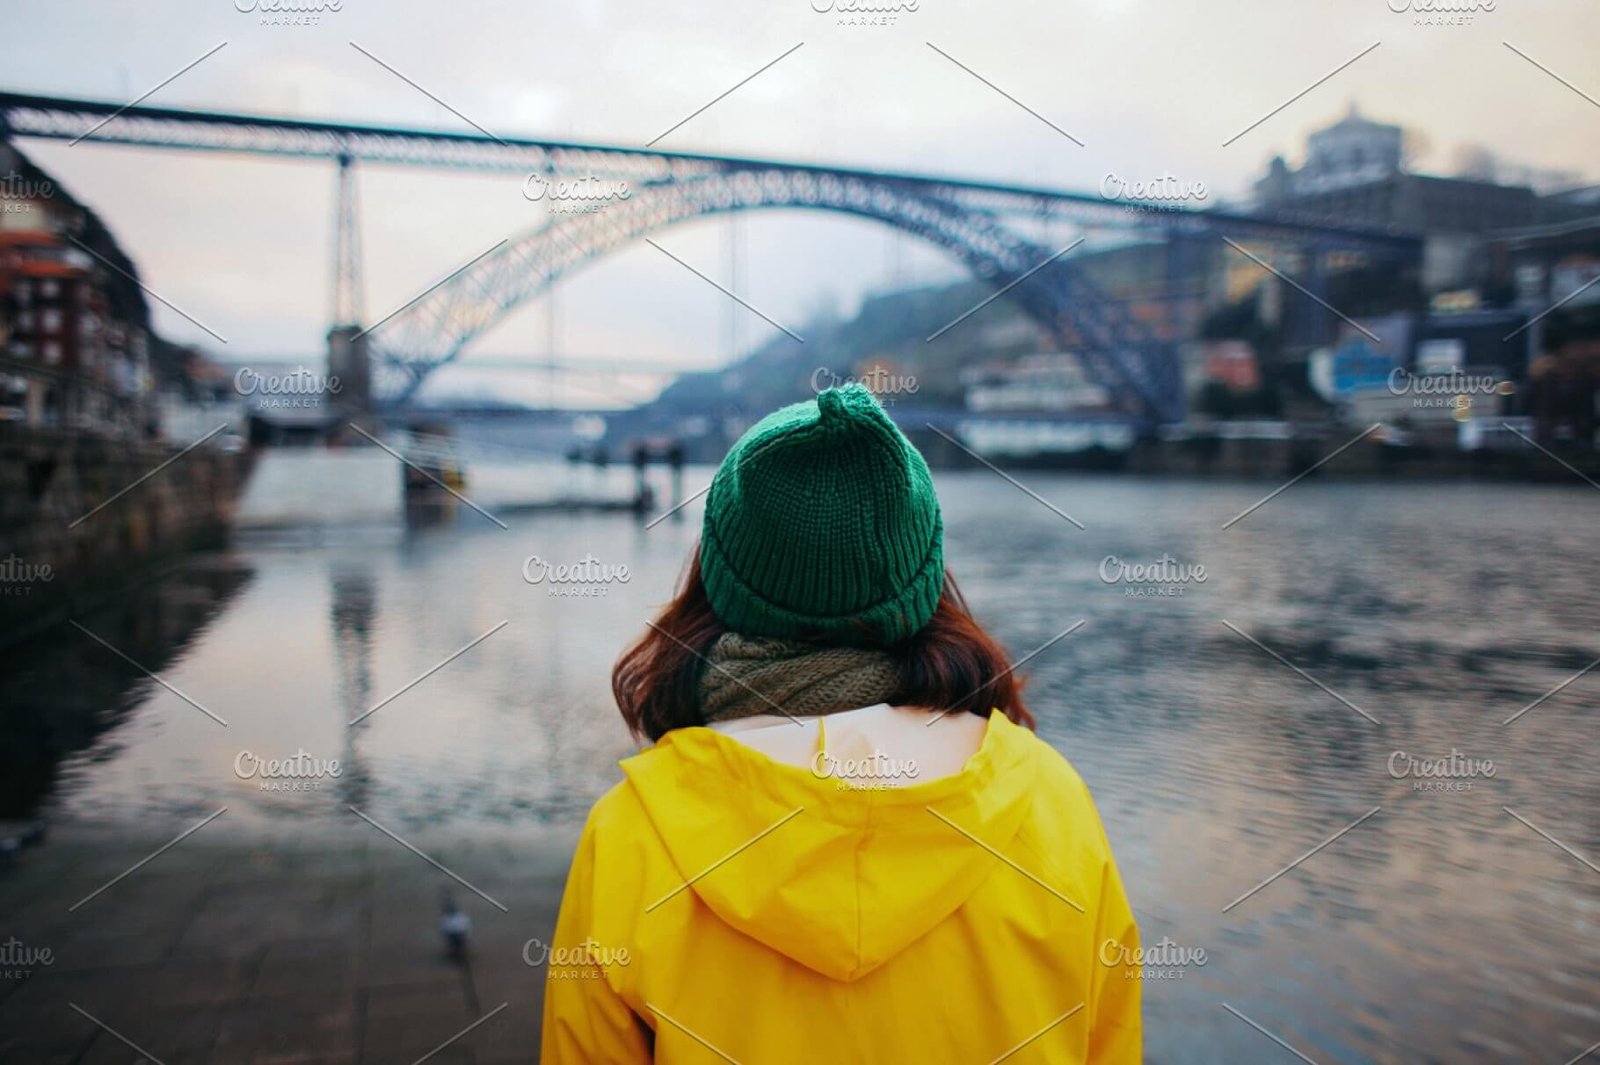 A girl In Beanie Looking At The Bridge Mockup